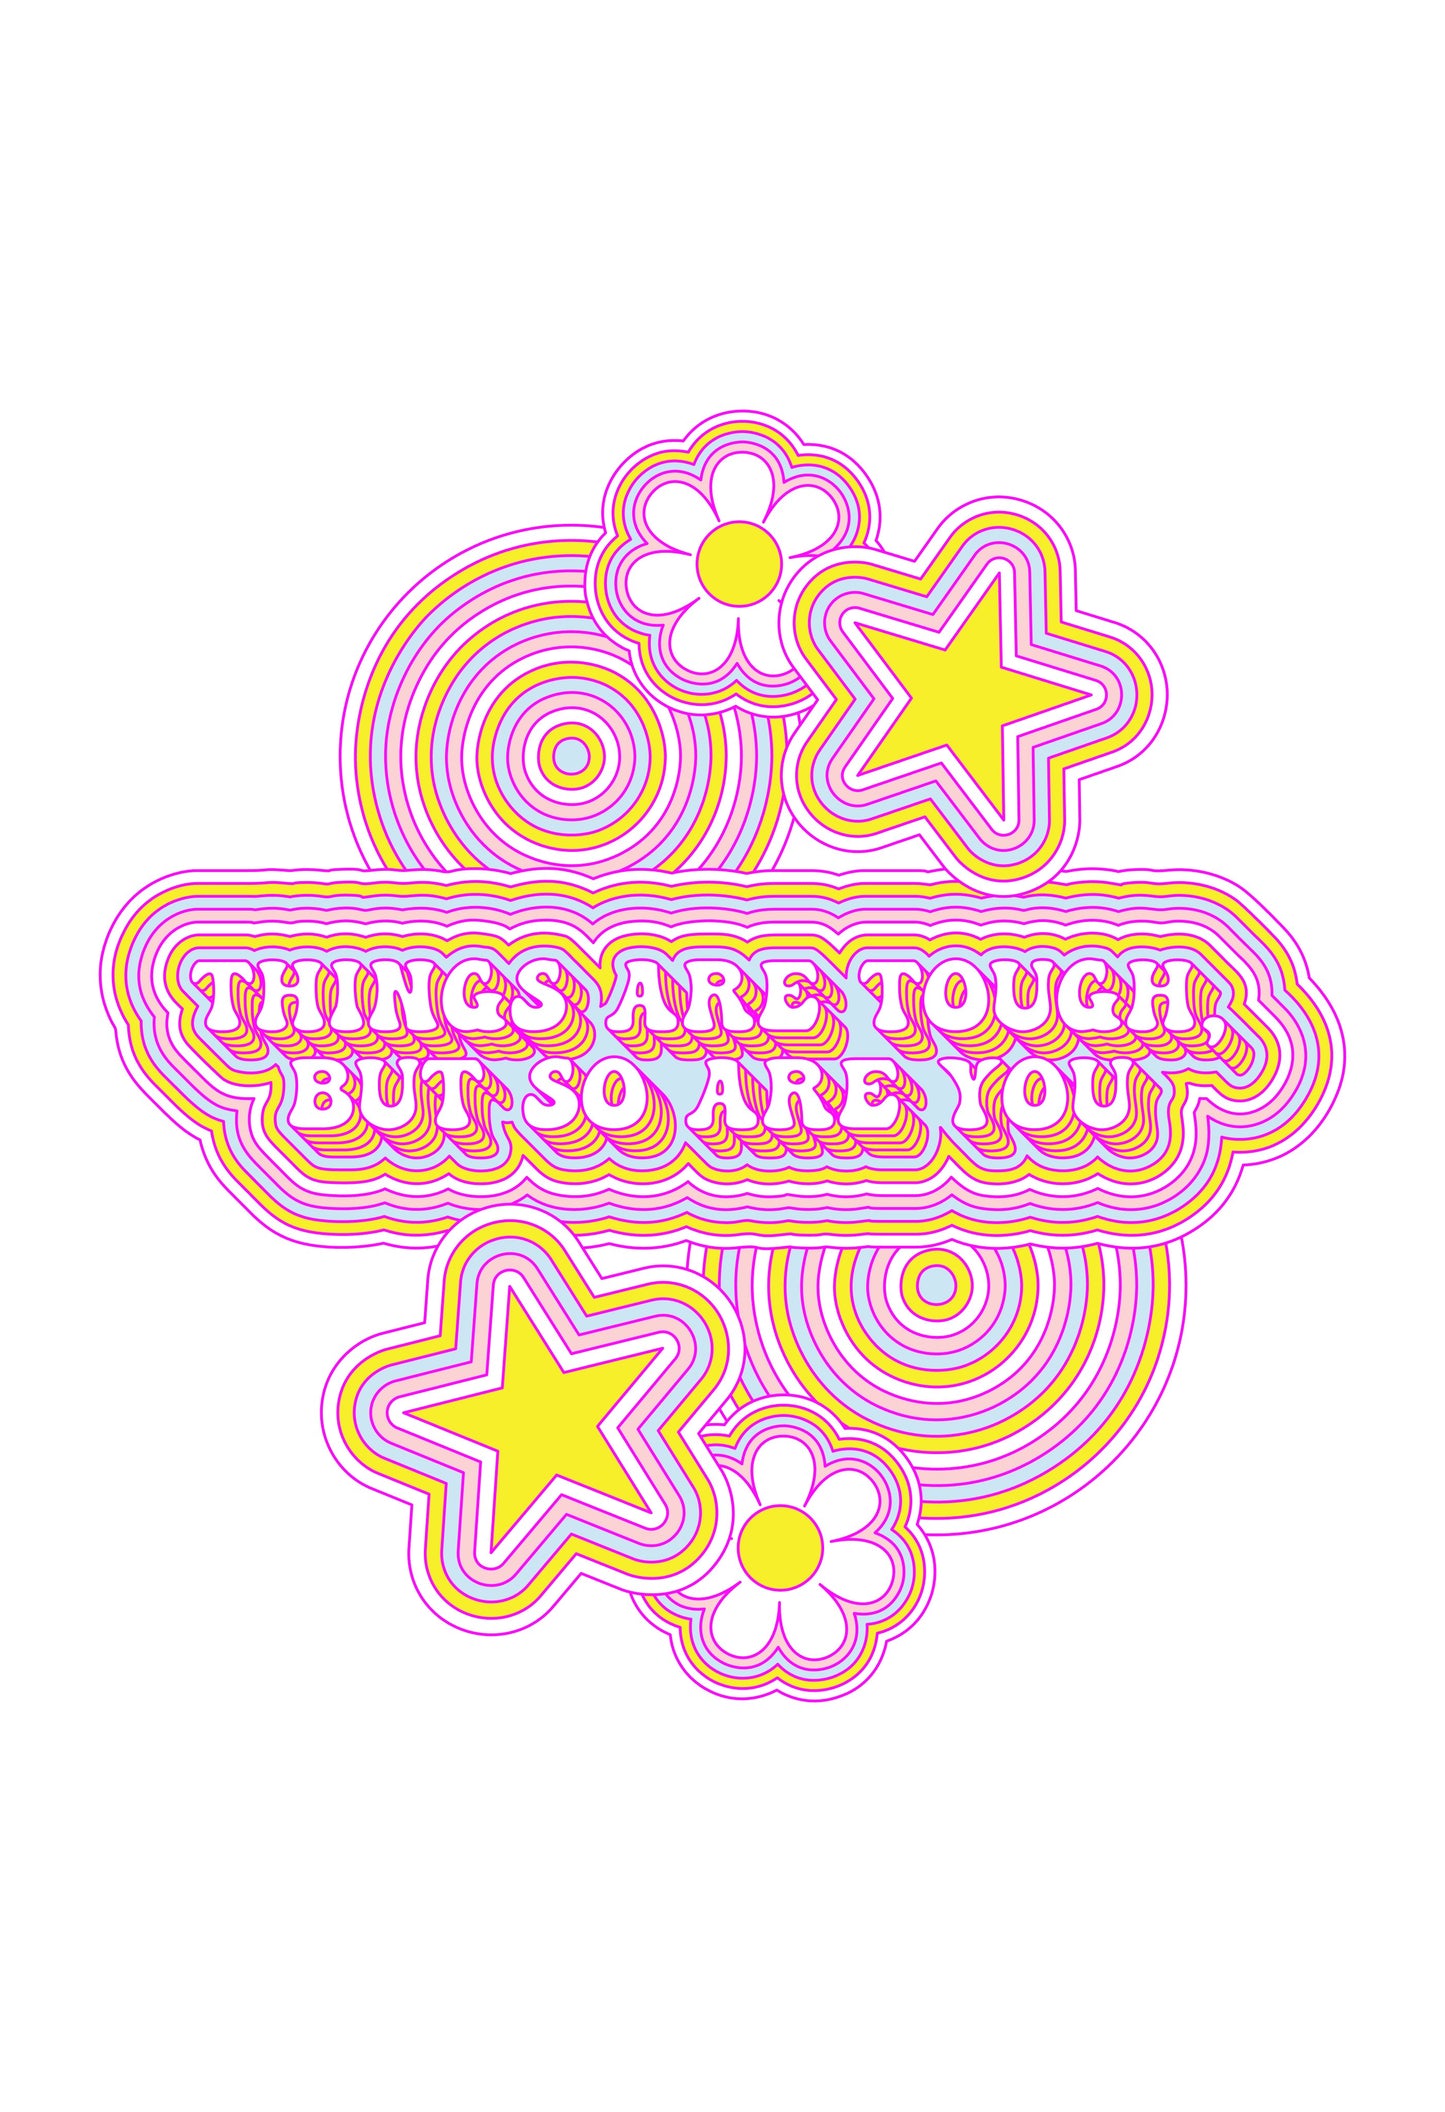 "THINGS ARE TOUGH, BUT SO ARE YOU" 13 x 19" Poster Print